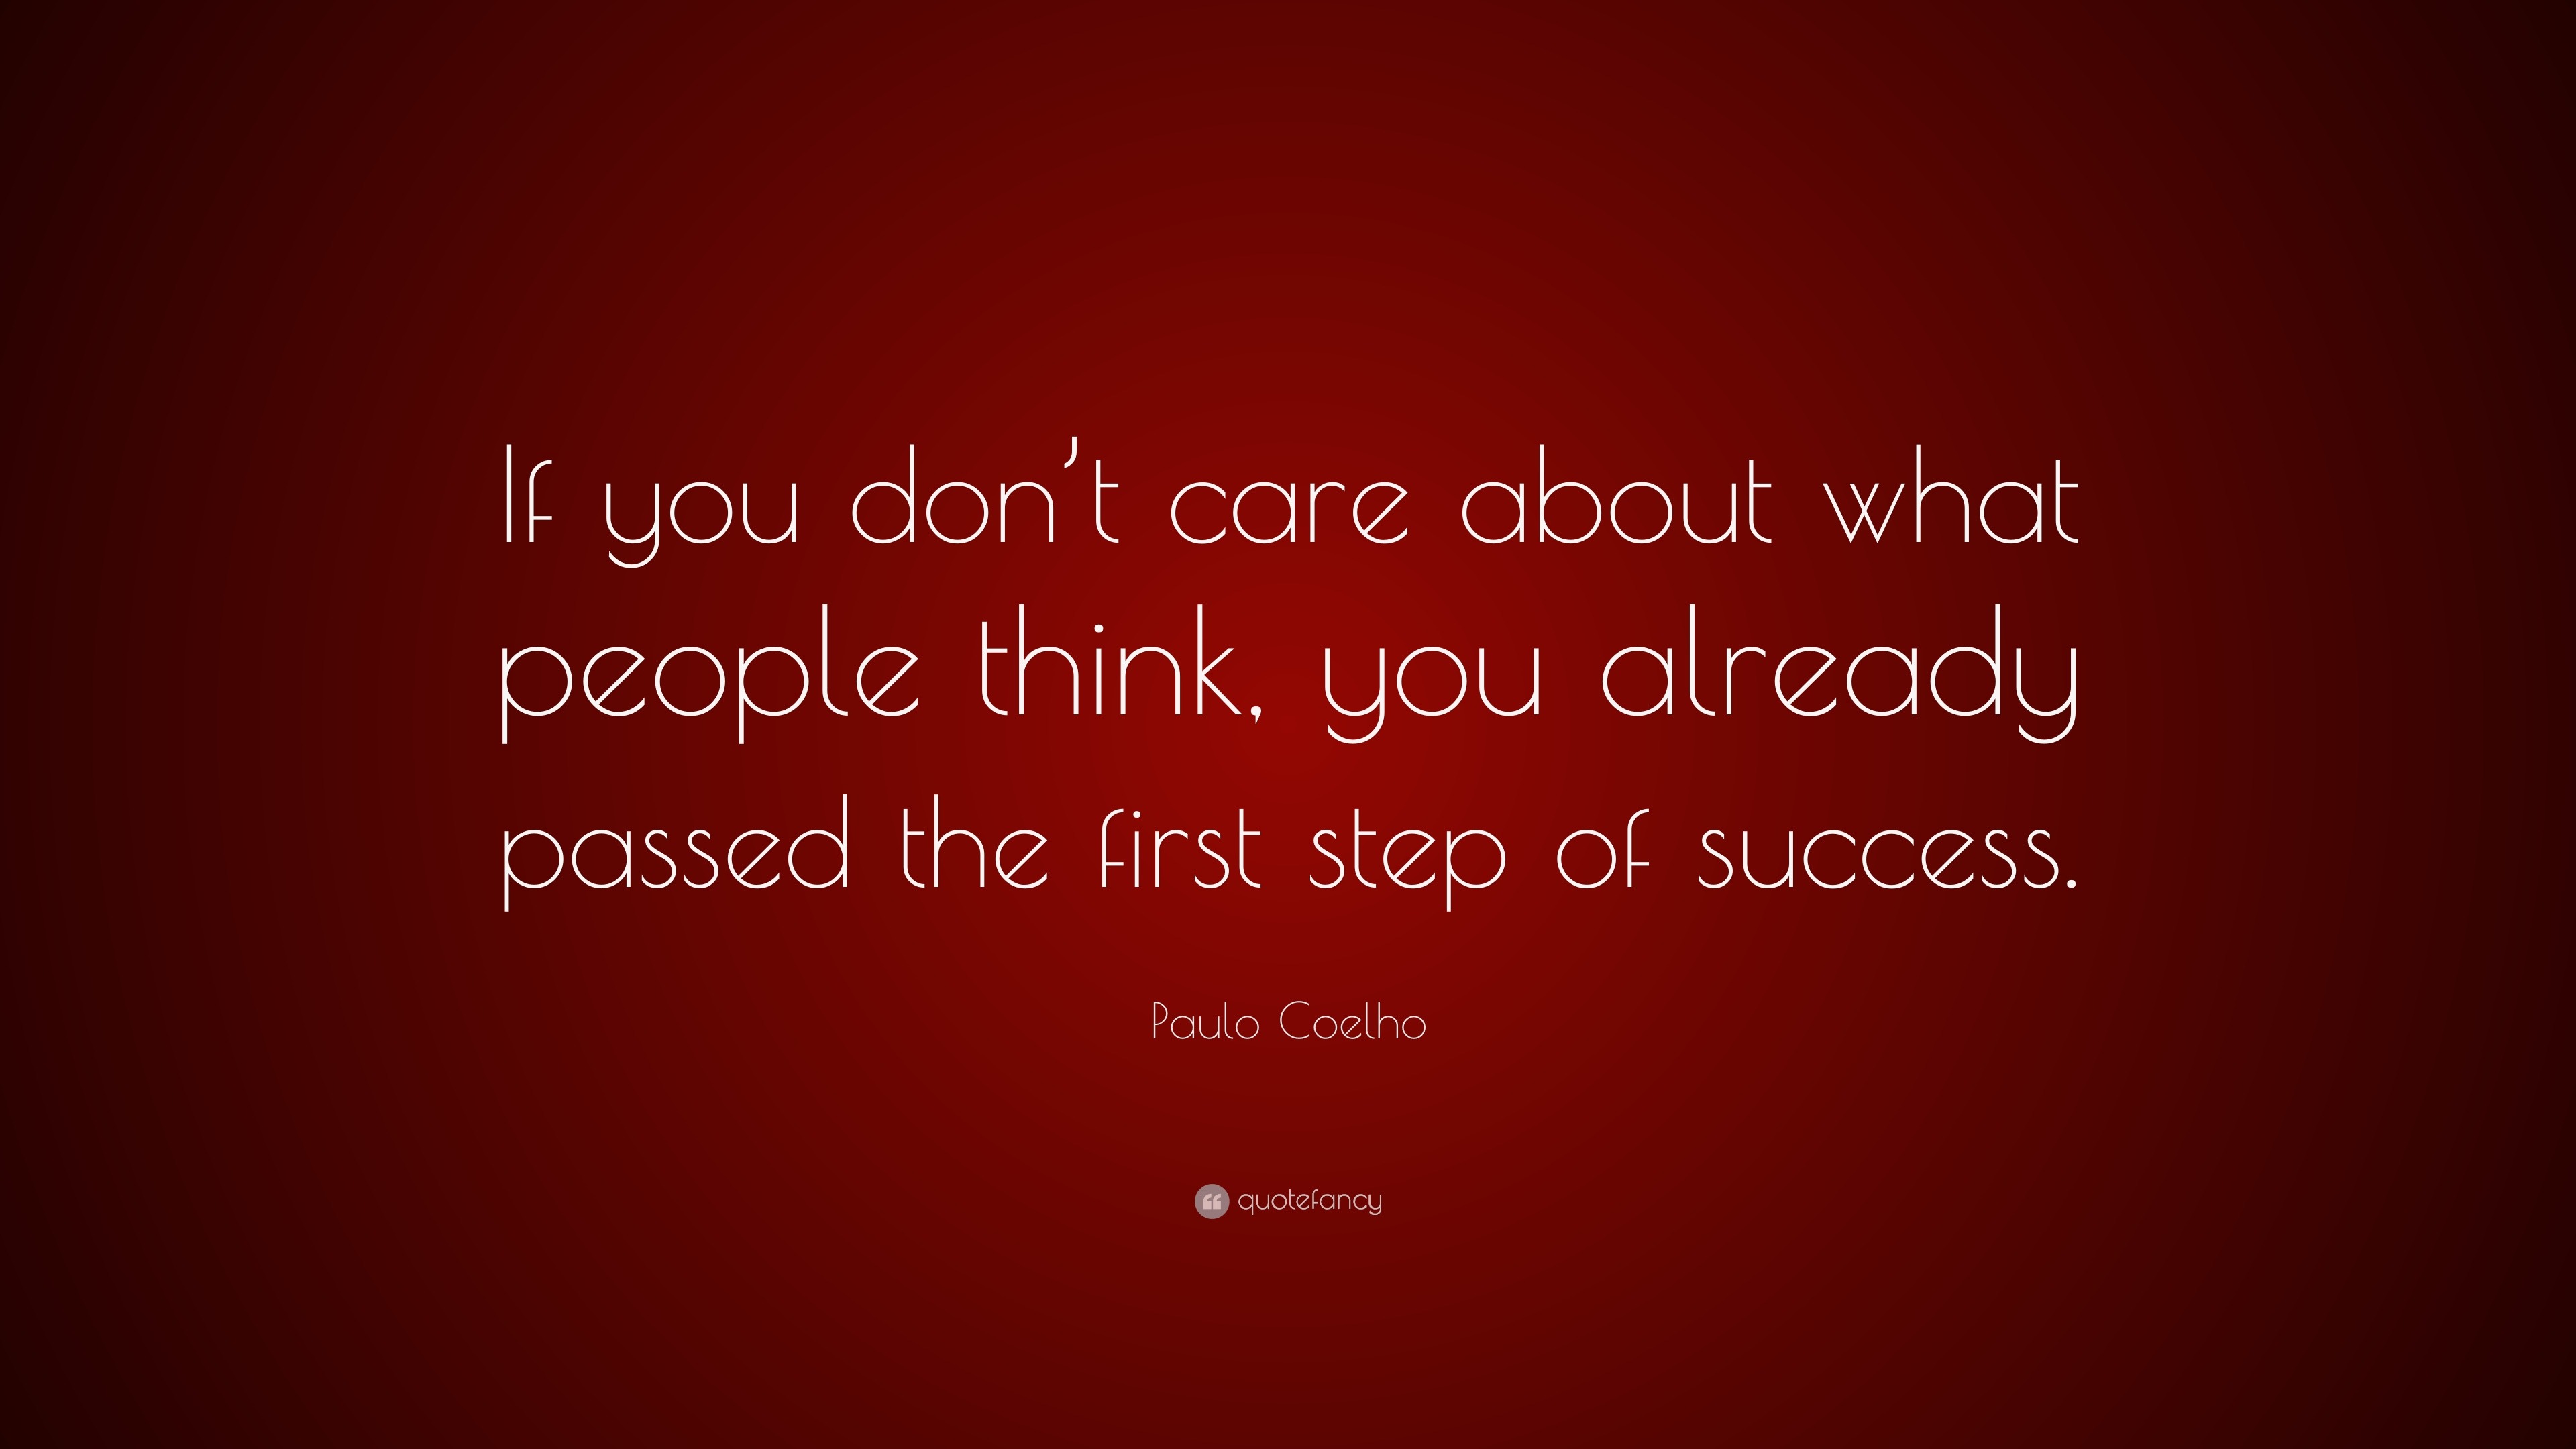 Paulo Coelho Quote If You Don T Care About What People Think You Already Passed The